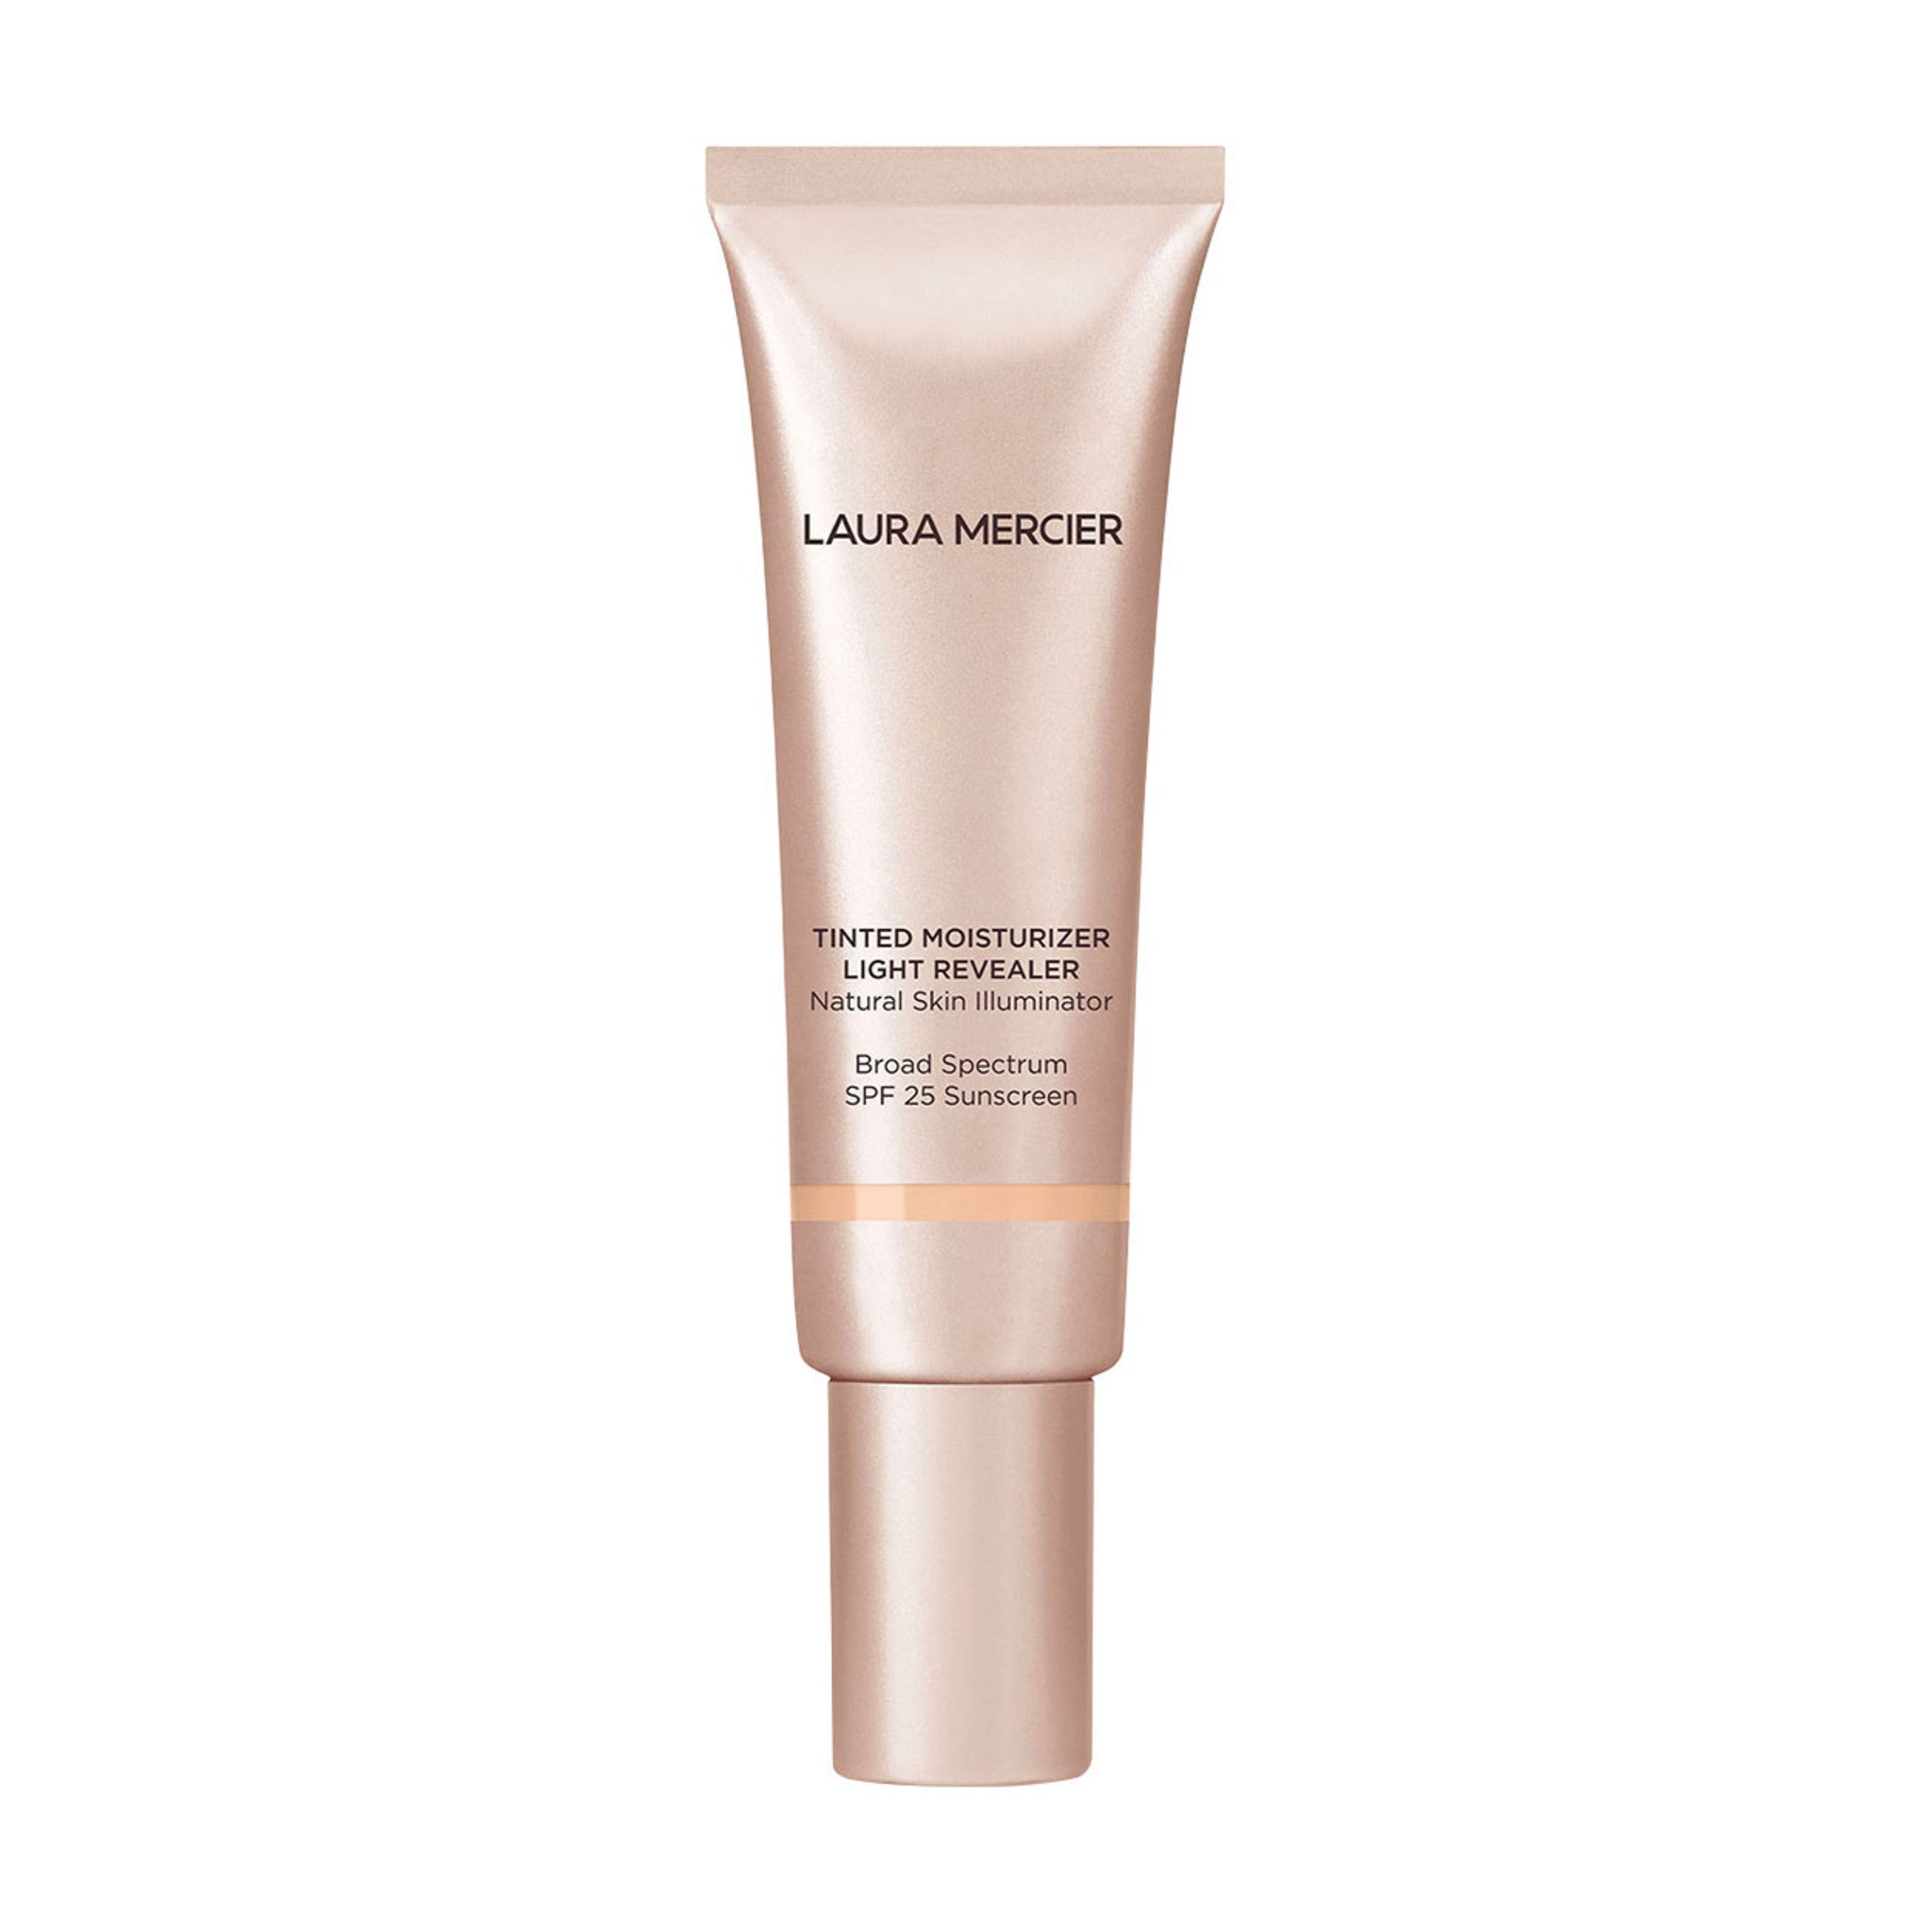 Laura Mercier Tinted Moisturizer Light Revealer Natural Skin Illuminator Broad Spectrum SPF 25 Color/Shade variant: Petal main image. This product is for light neutral complexions